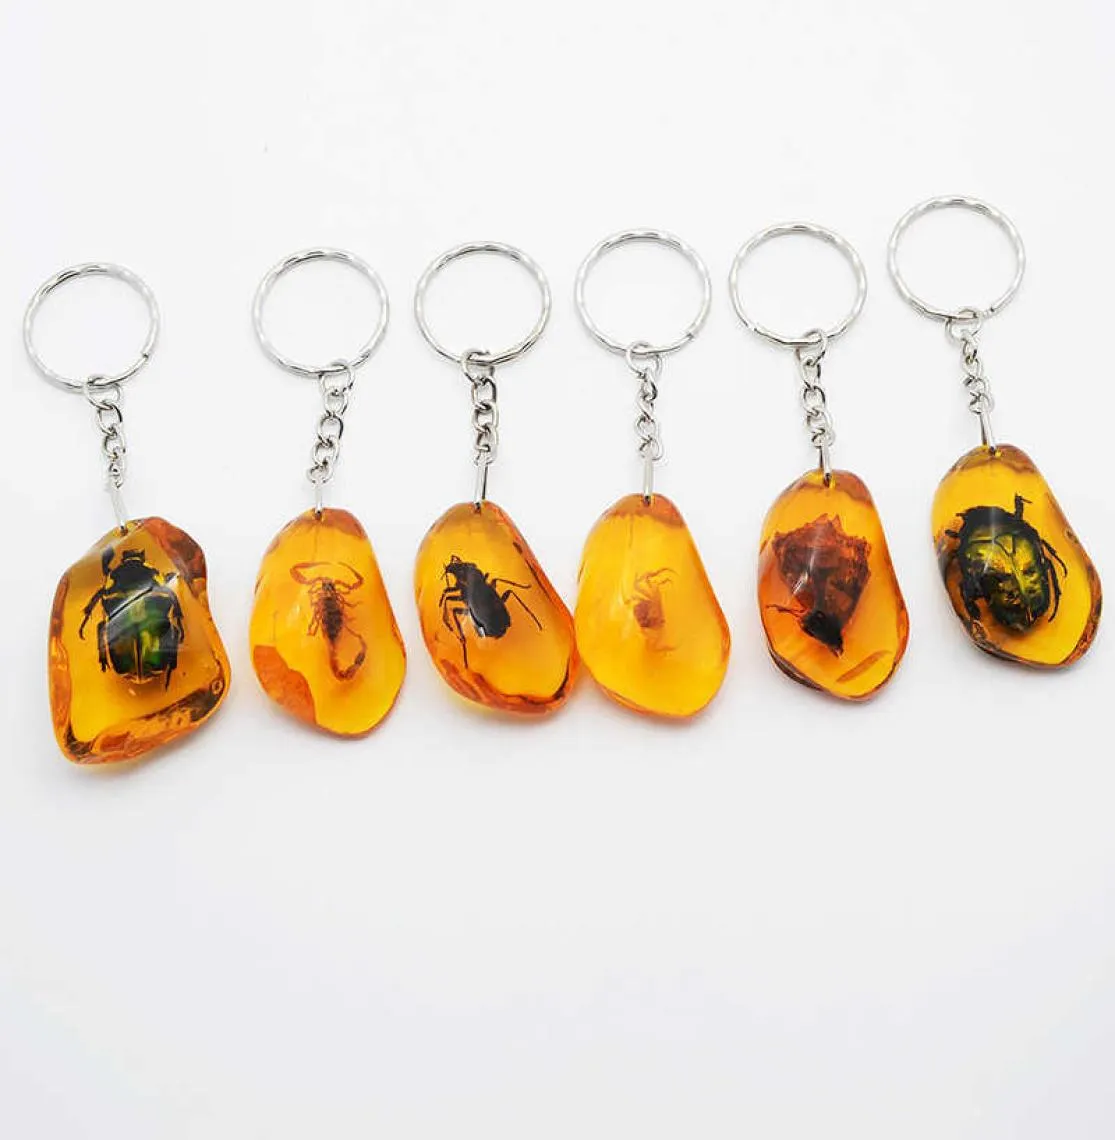 6pcsSet Real Scorpion Key Chain New Luminous Product Real Crab and Scorpion Keychain bag Car key Ring G10197307721